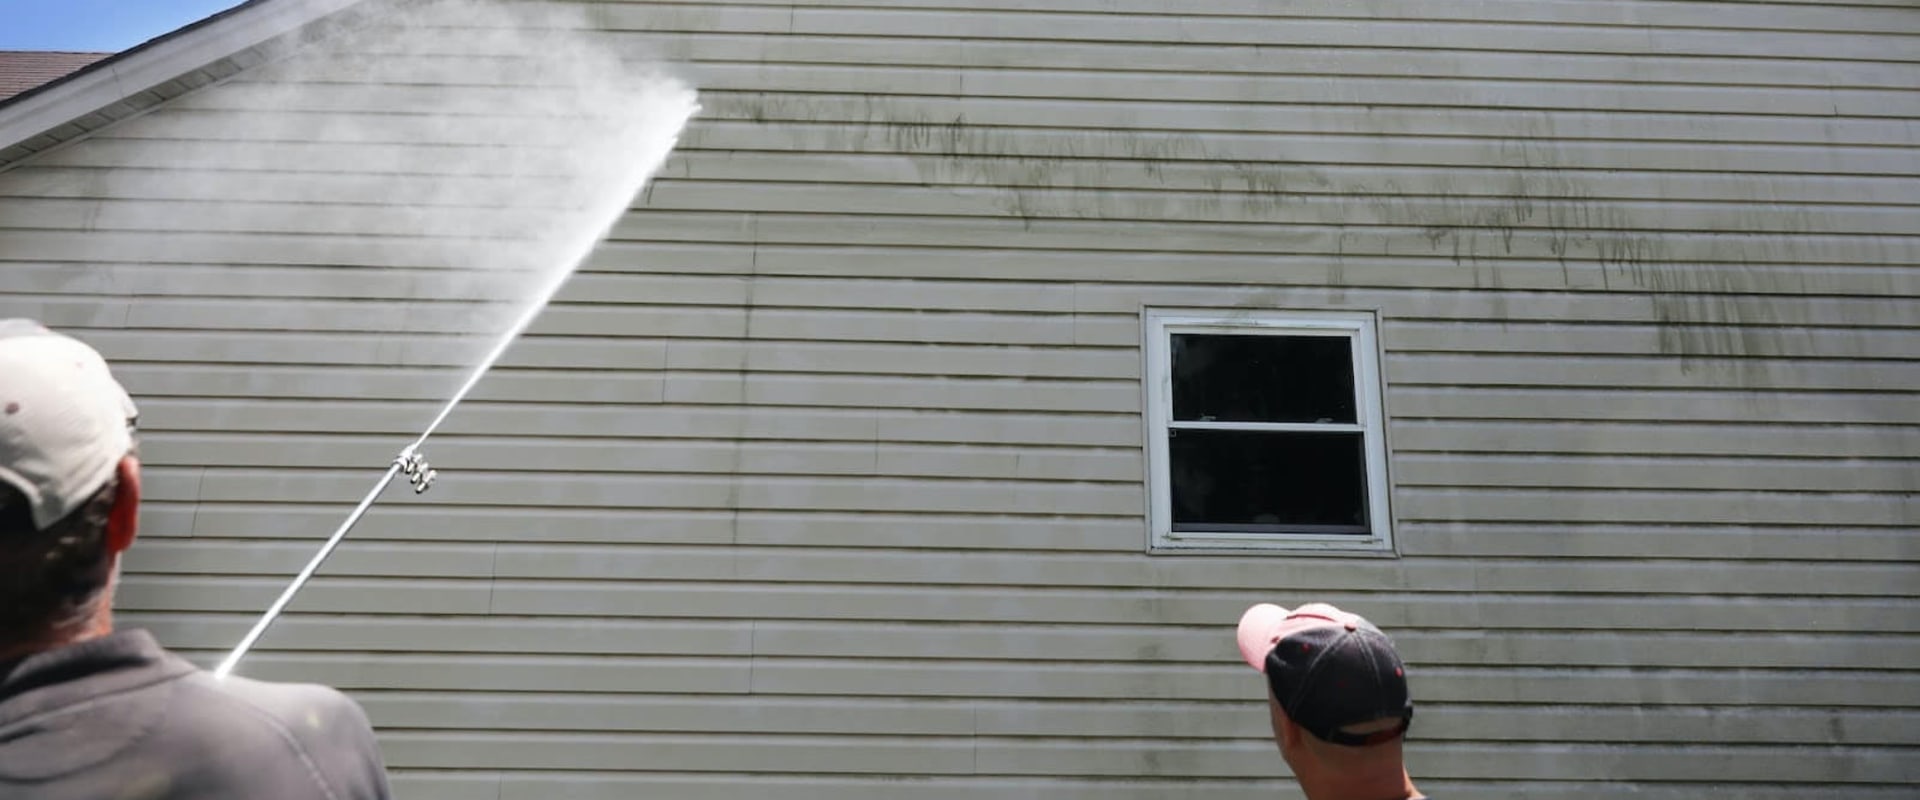 What are the cons of power washing a house?